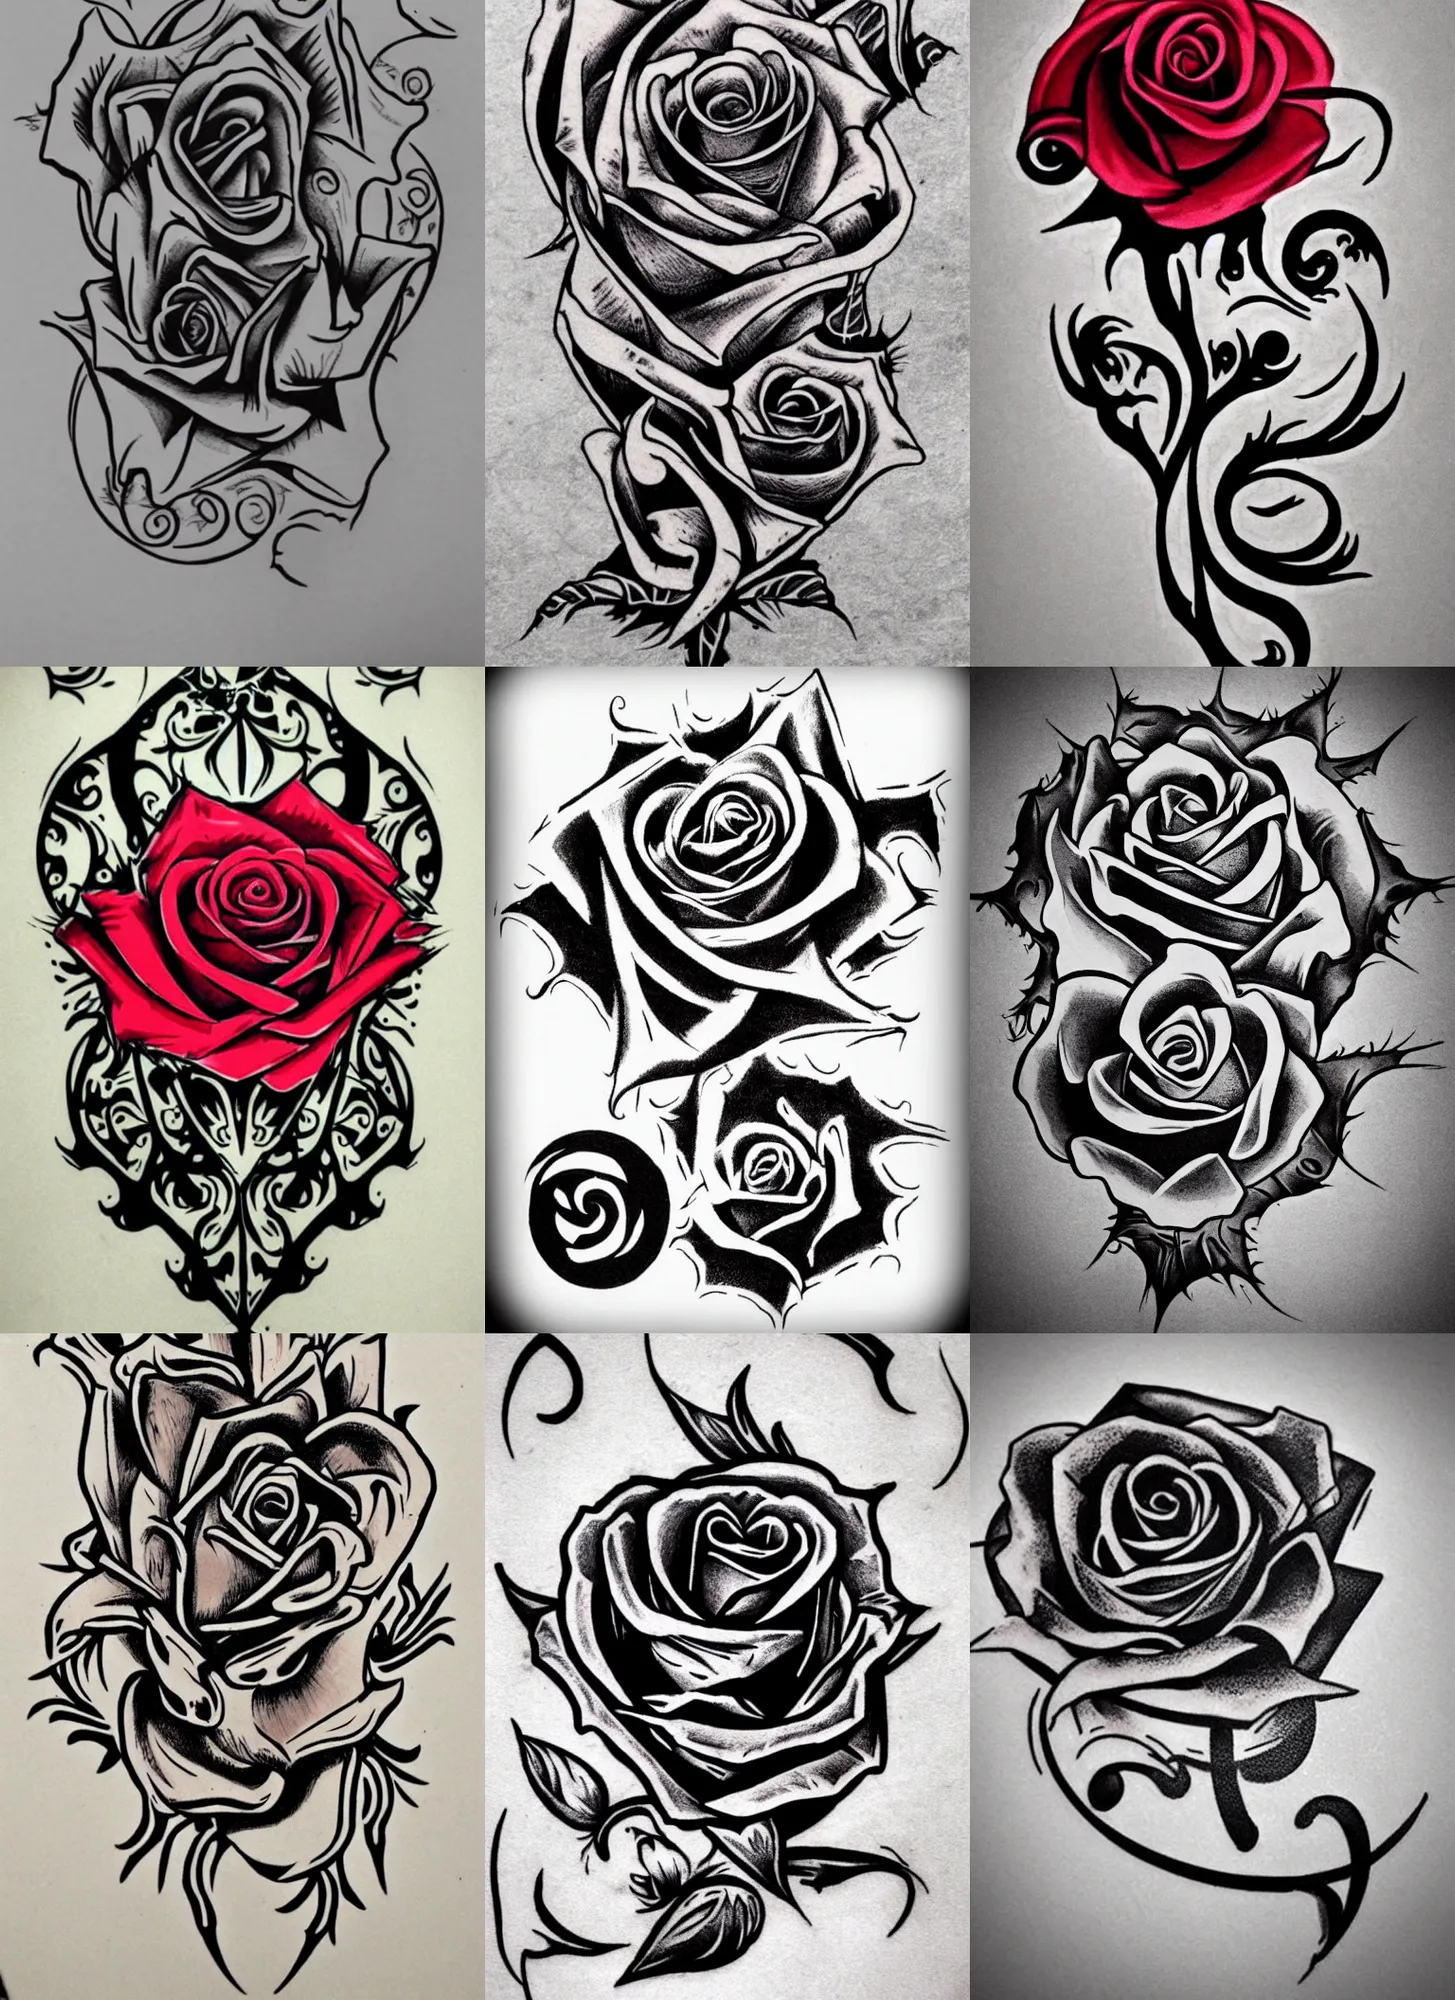 How to Draw Rose Tattoo Designs